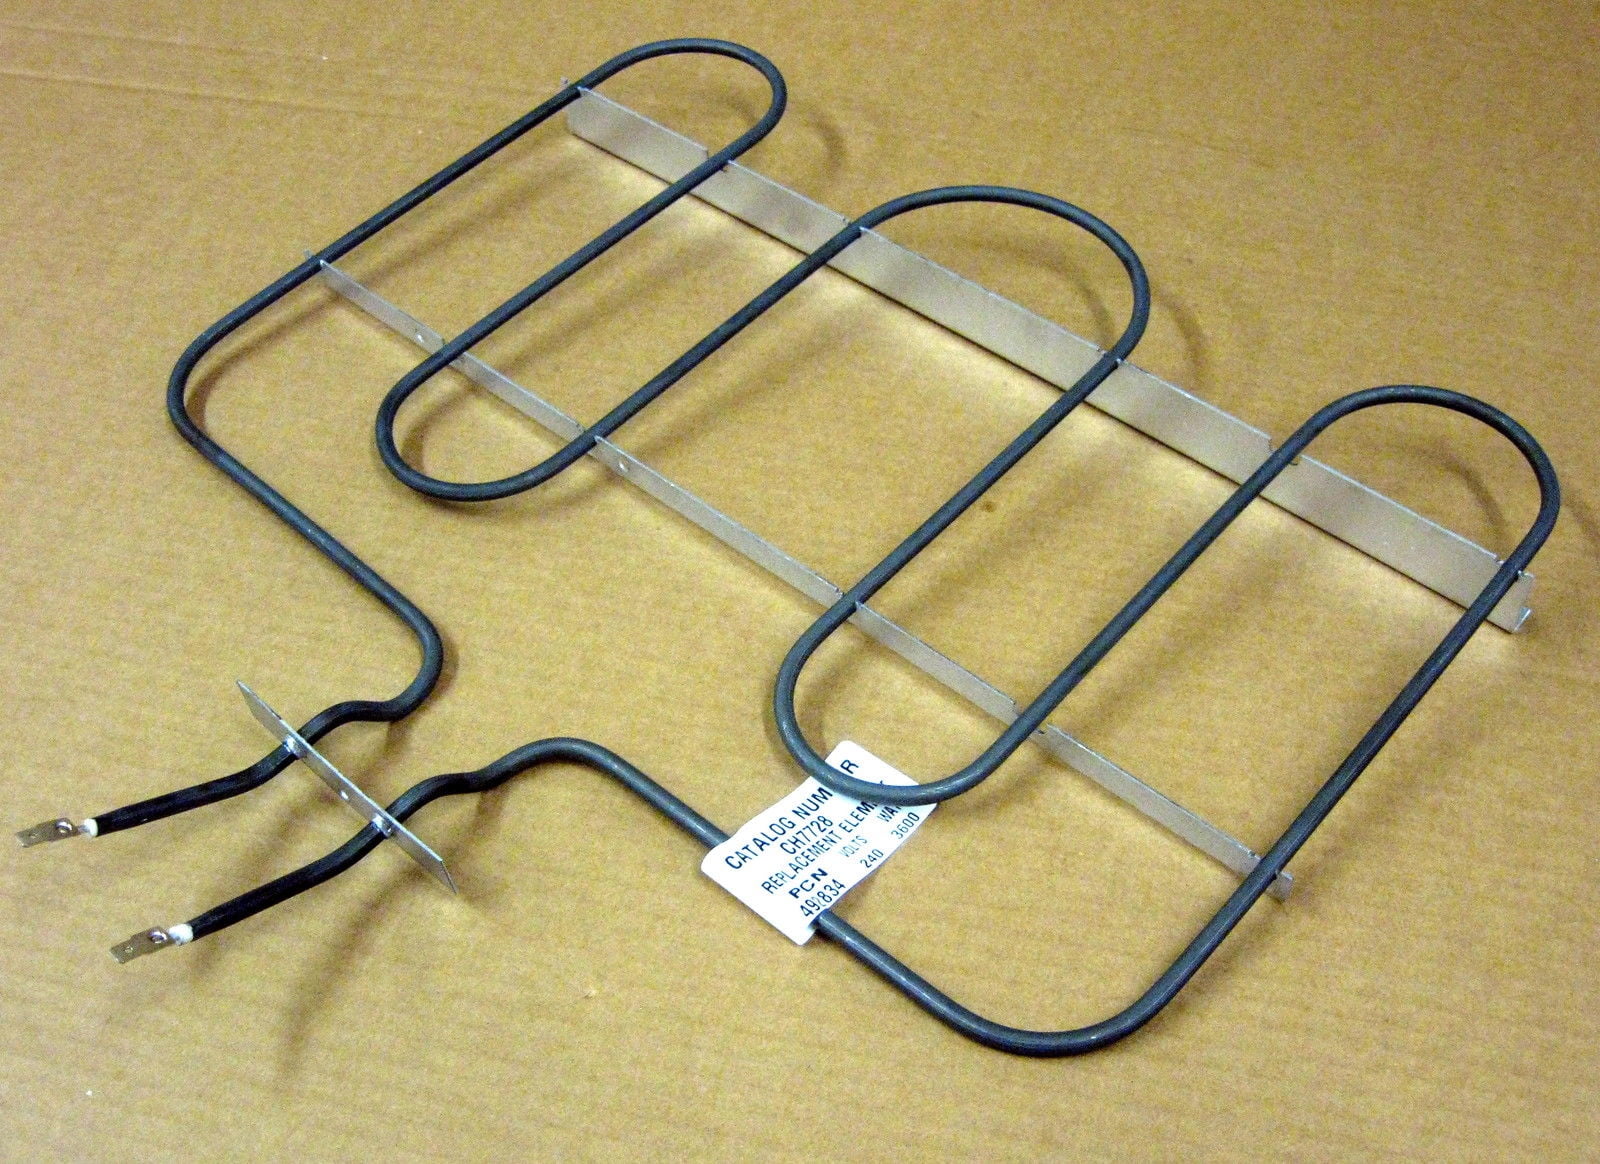 Details about   VINTAGE MAGIC CHEF RANGE OVEN WIRE-IN BAKE ELEMENT-106A-640W/CH764-APPLIANCE PT 